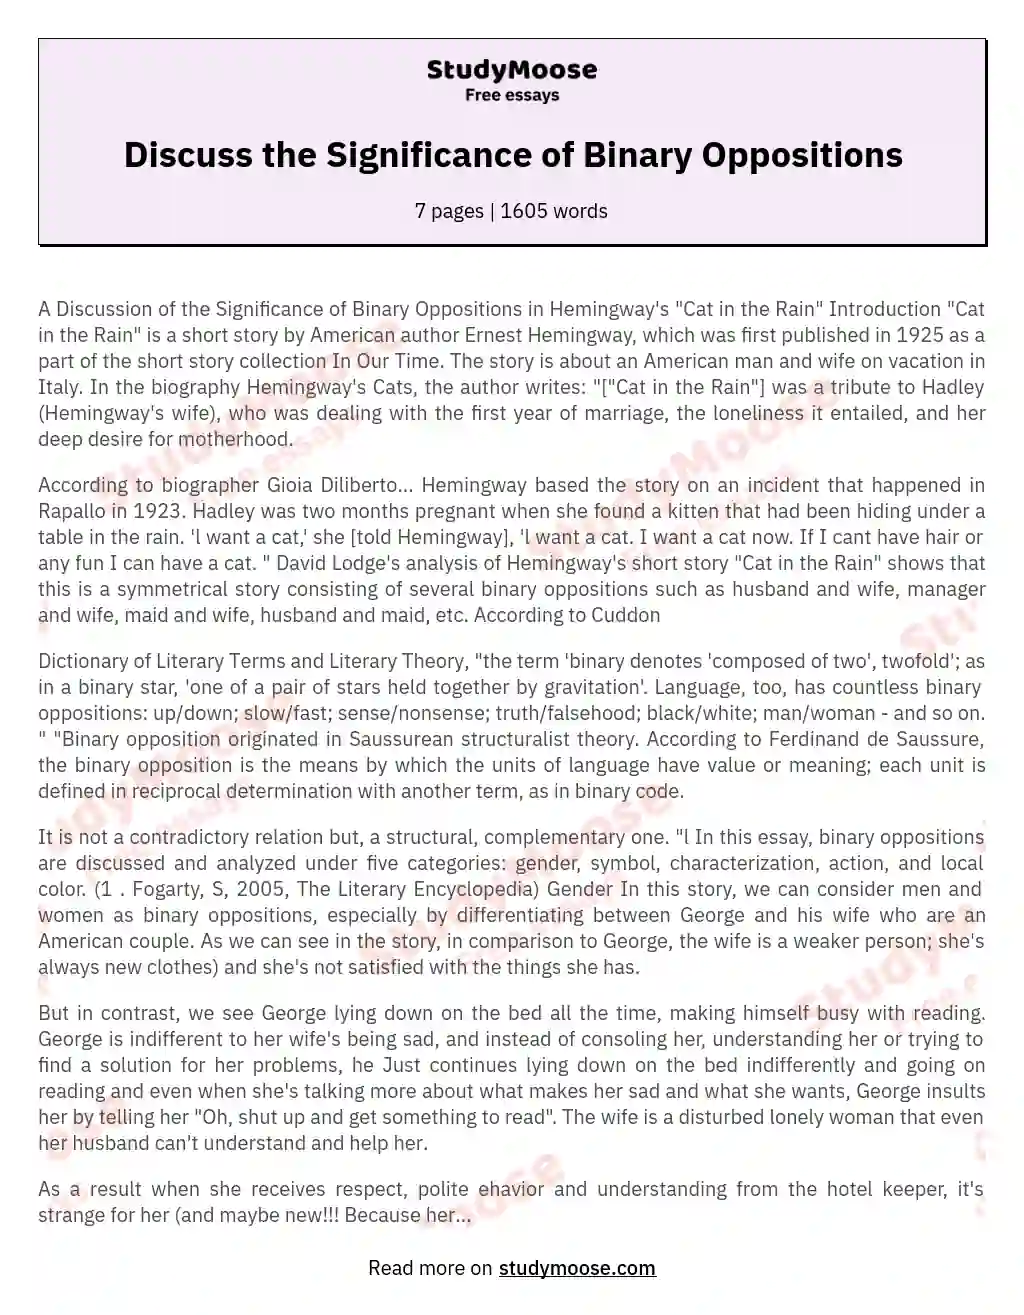 Discuss the Significance of Binary Oppositions essay